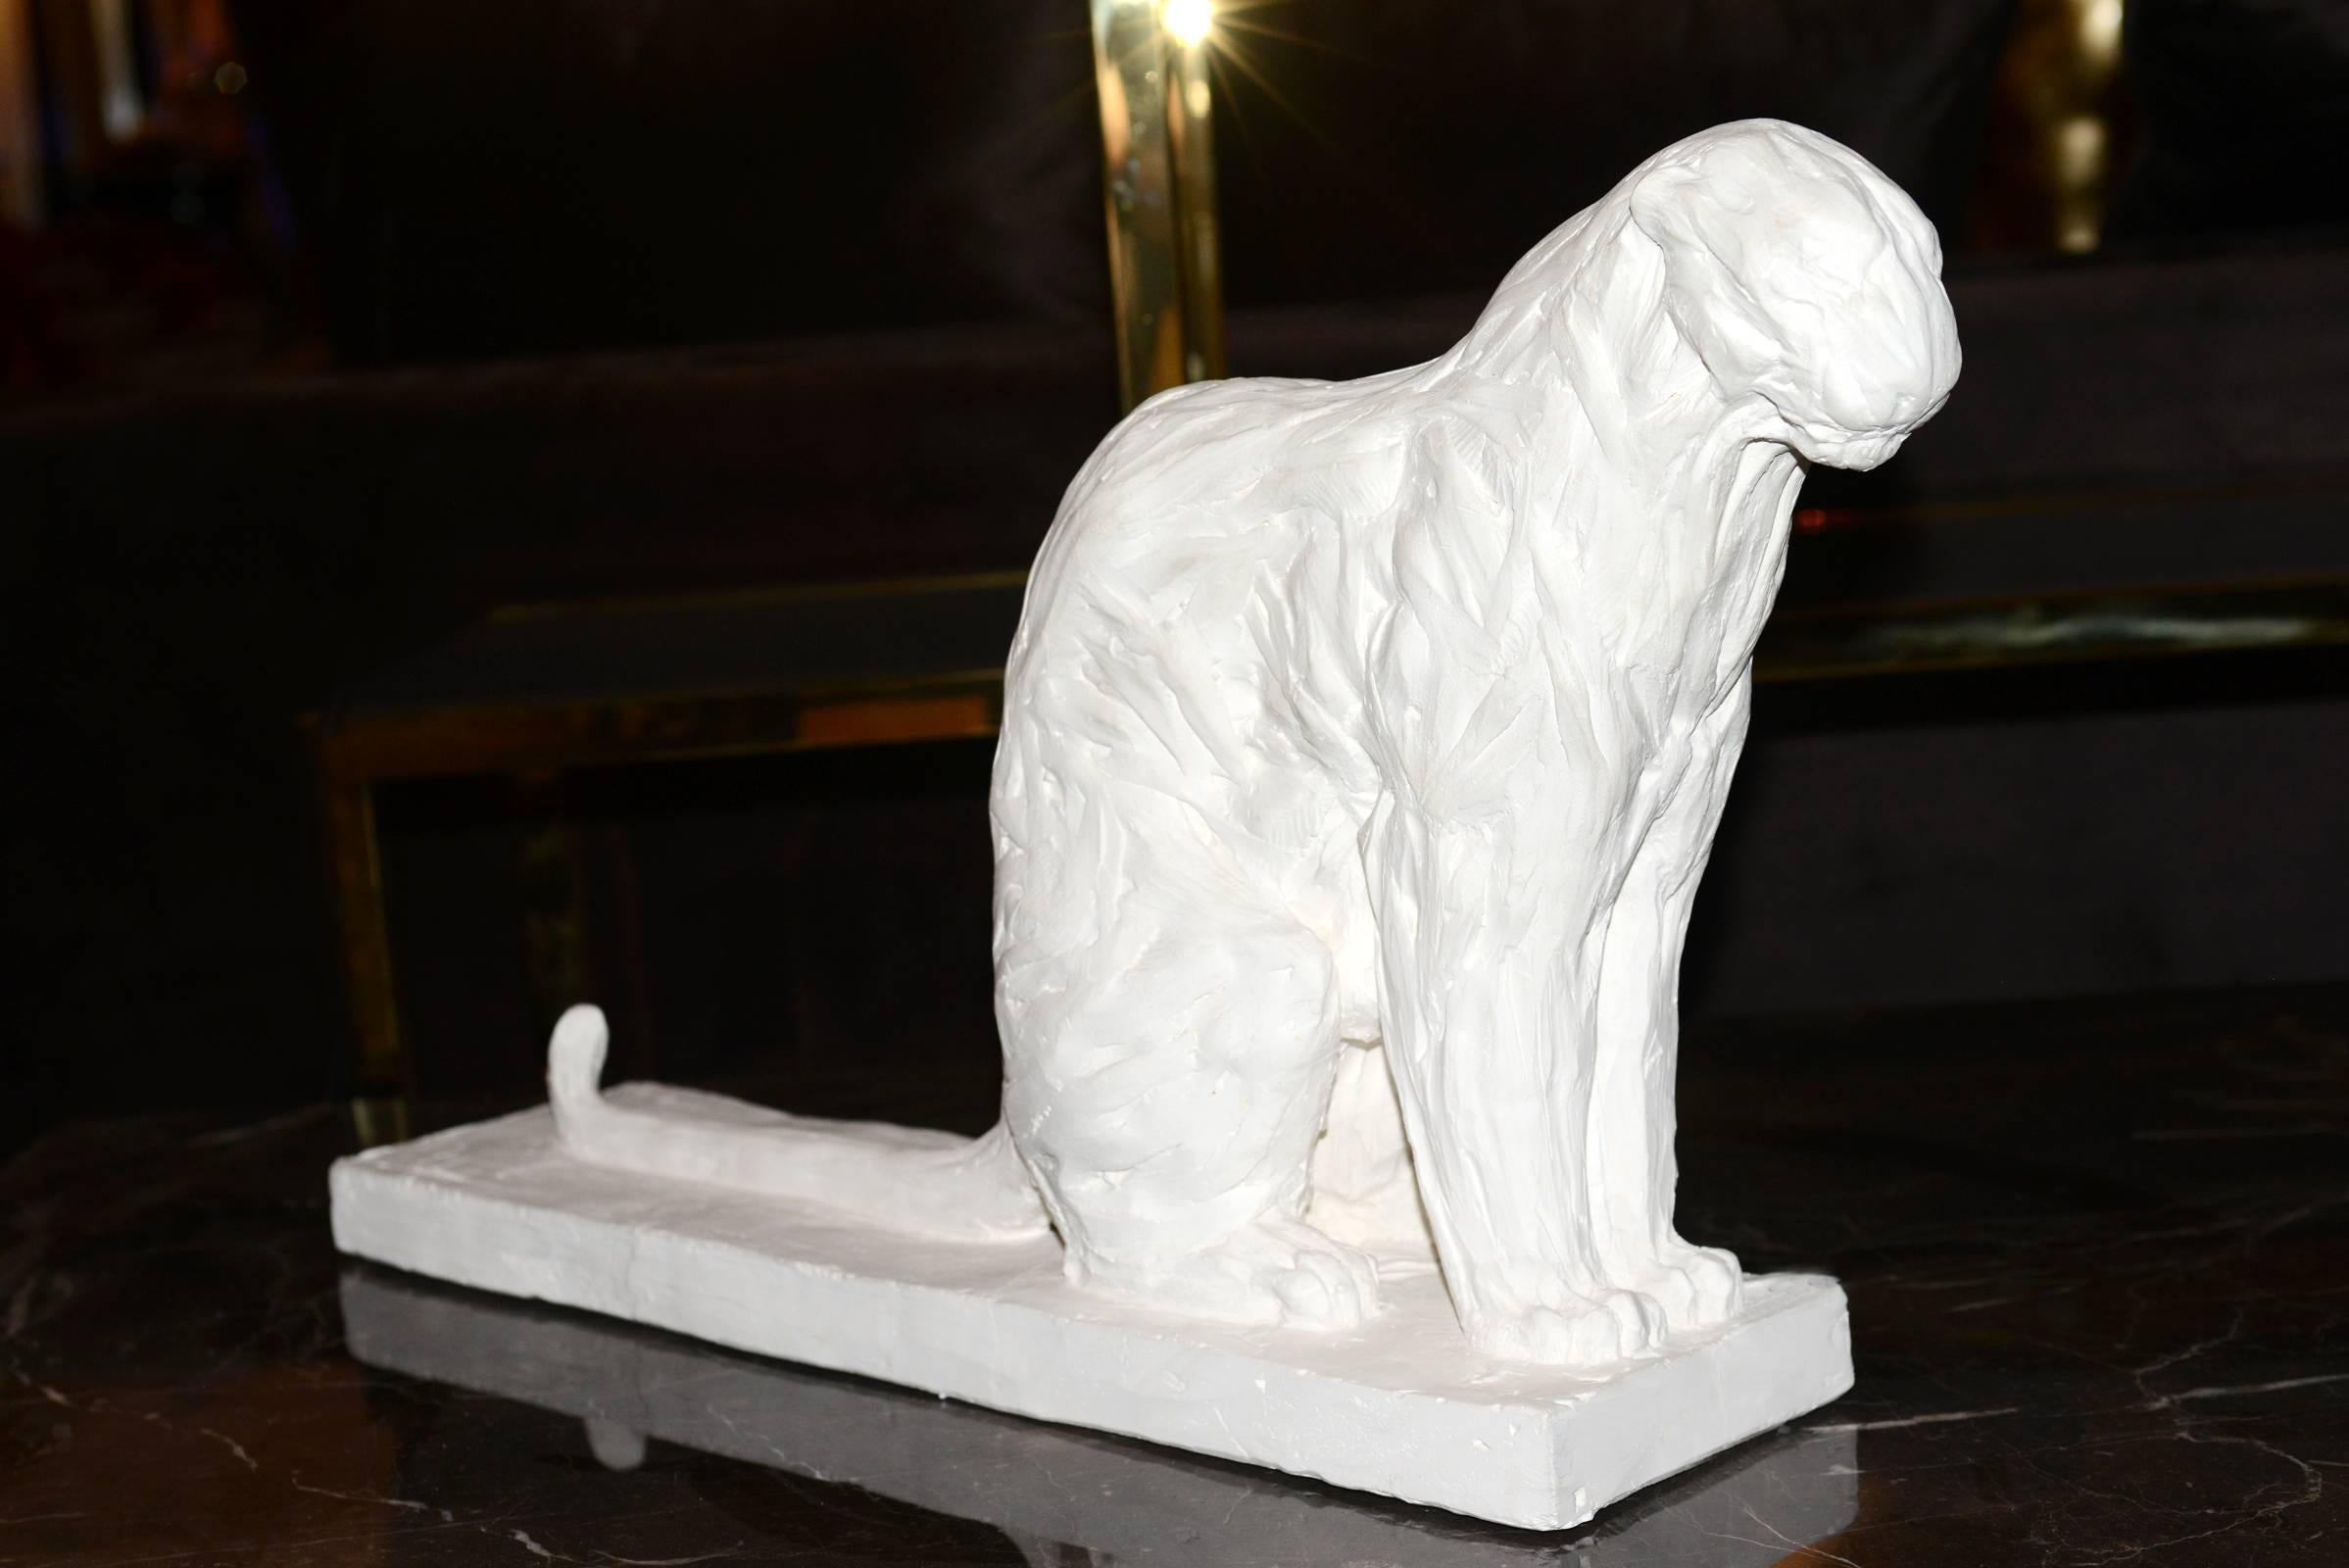 Sculpture panther in plaster.
Limited and numerated edition 45/100.
Made in France By J.B Vandame in 2015.

 